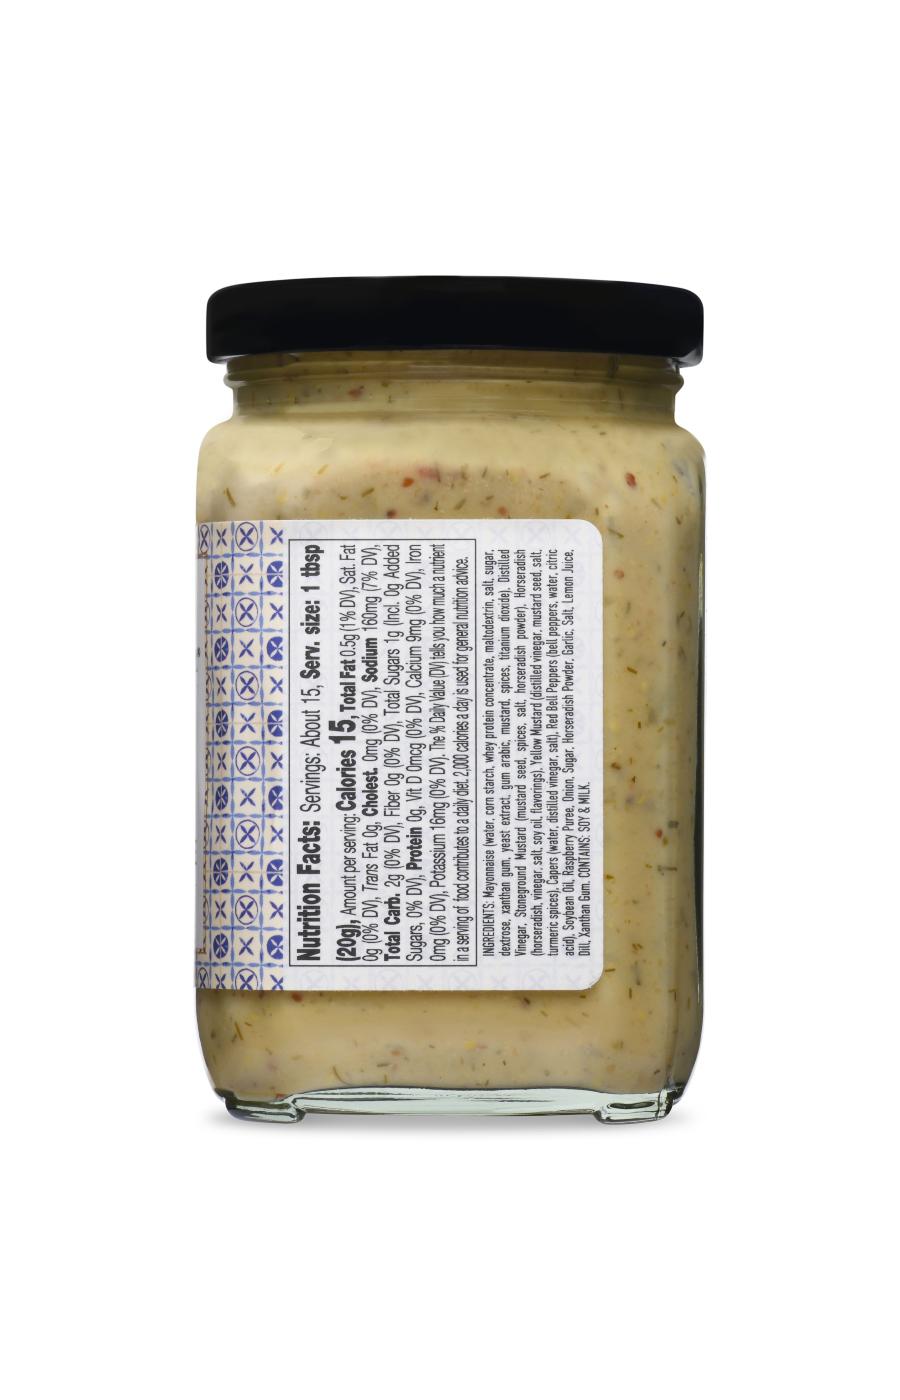 Fischer & Wieser Four Star Provisions Lemon Dill & Capers Sauce; image 2 of 2